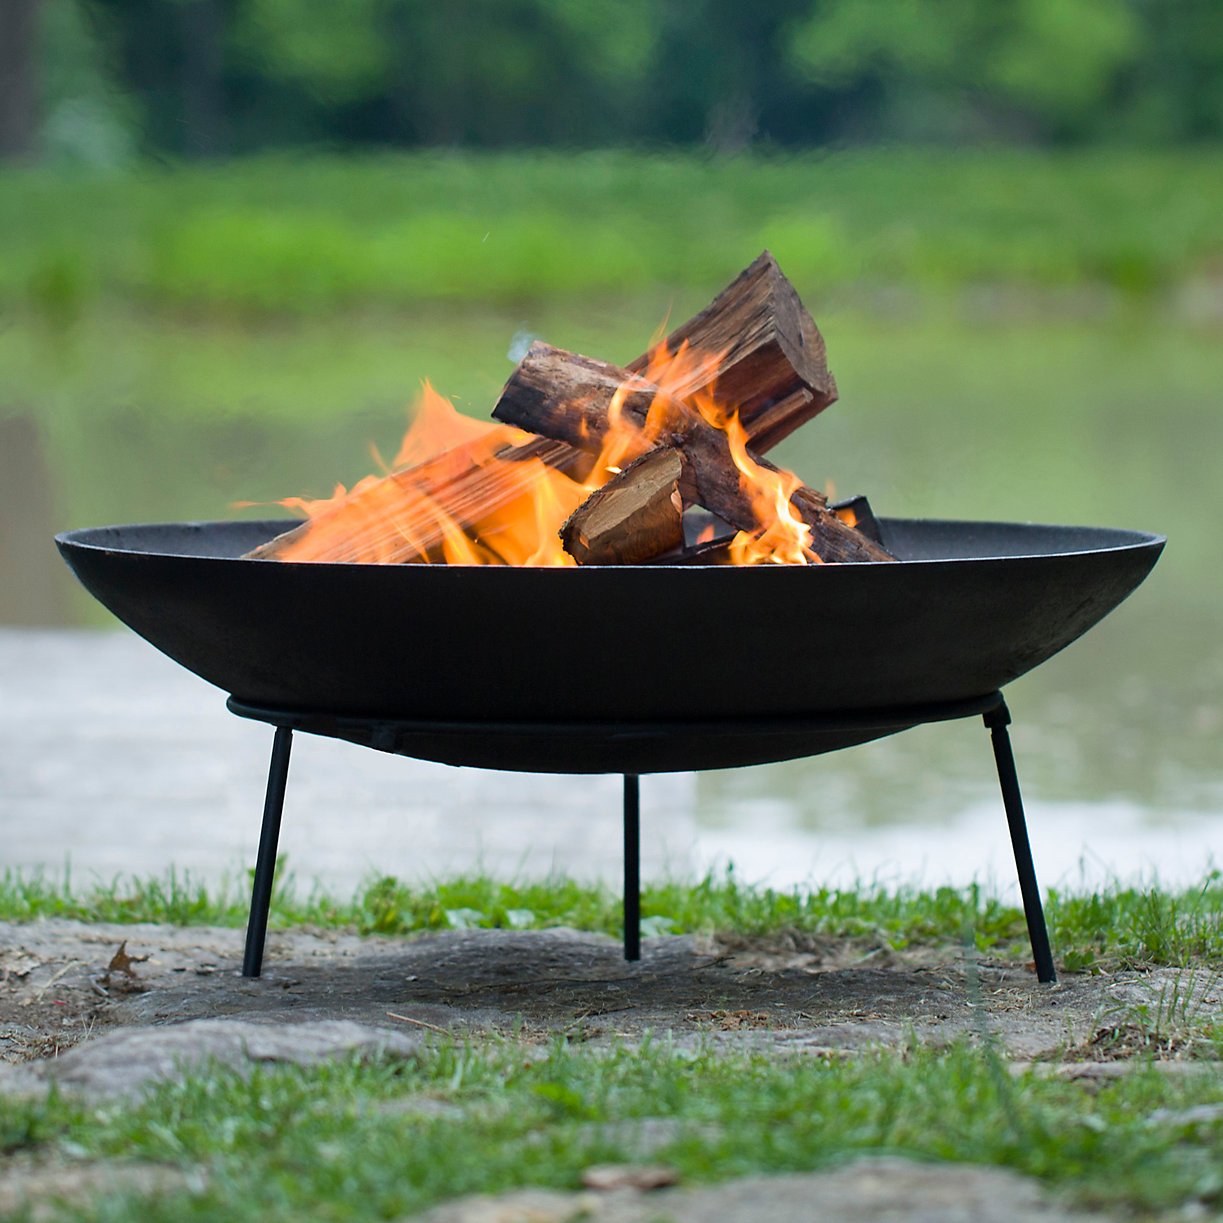 Fire Pit General Topics Asean Now, Disc Fire Pit